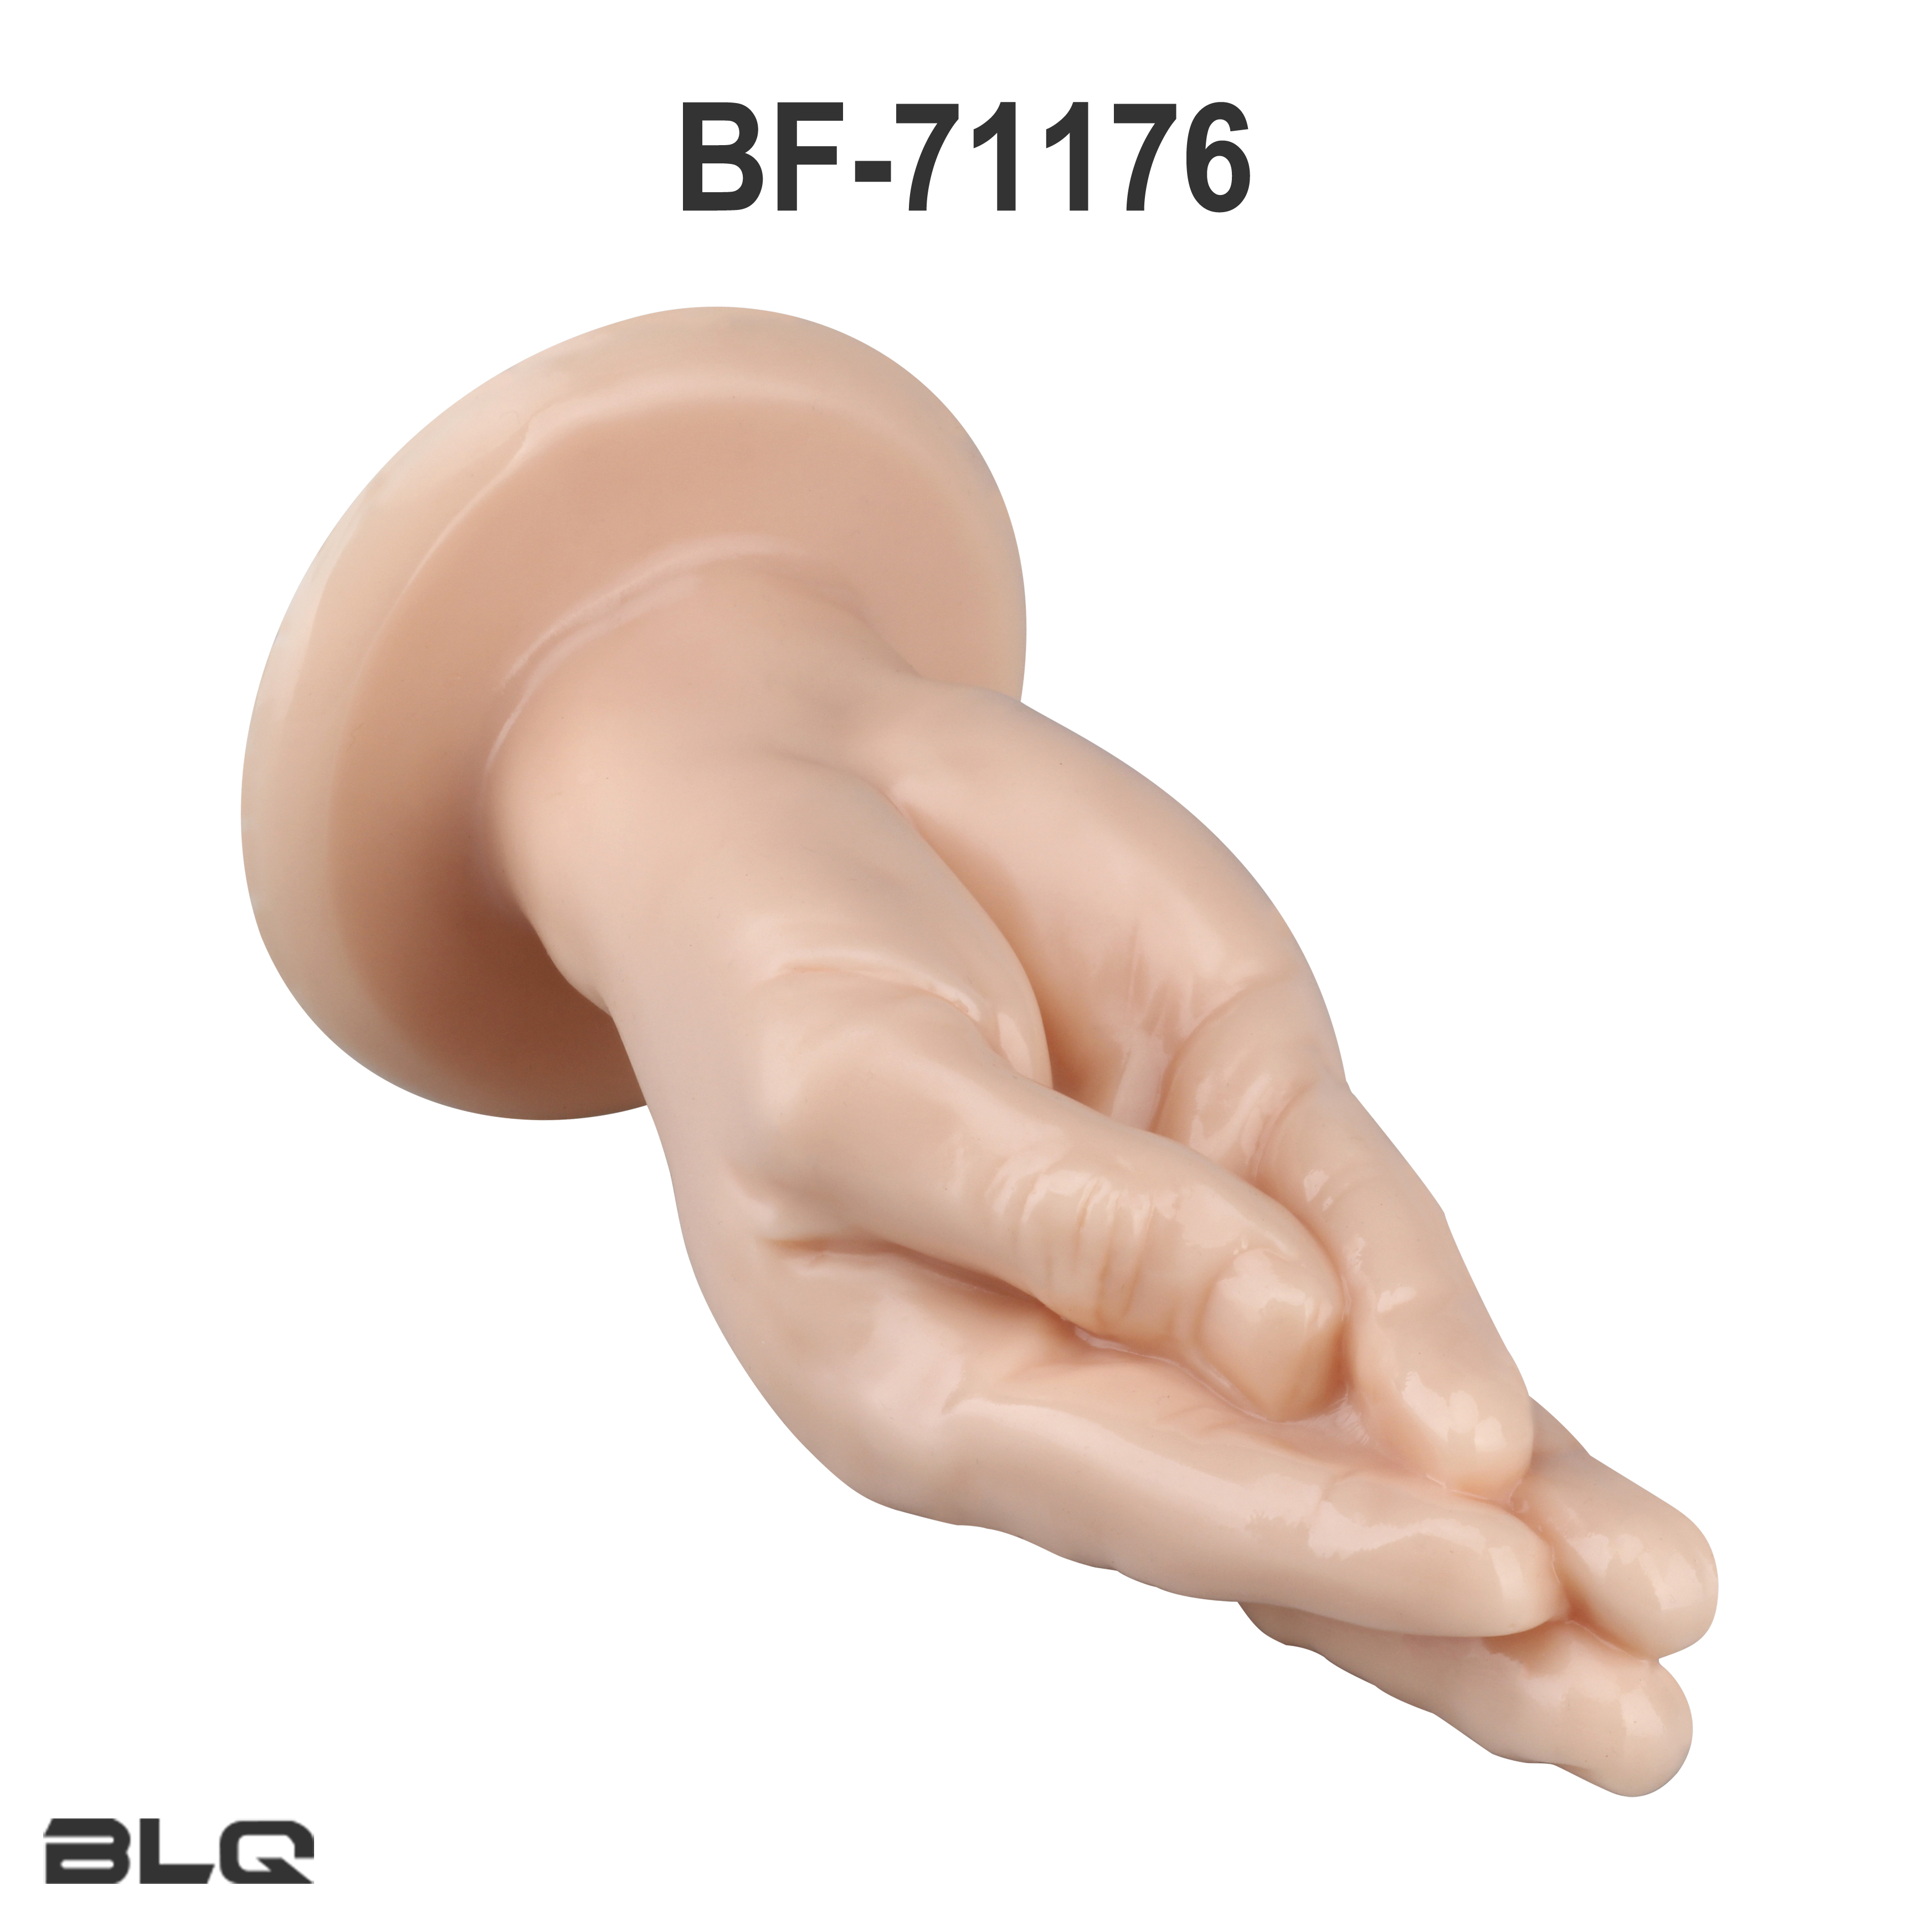 Realistic Fisting Hands Large Dildo